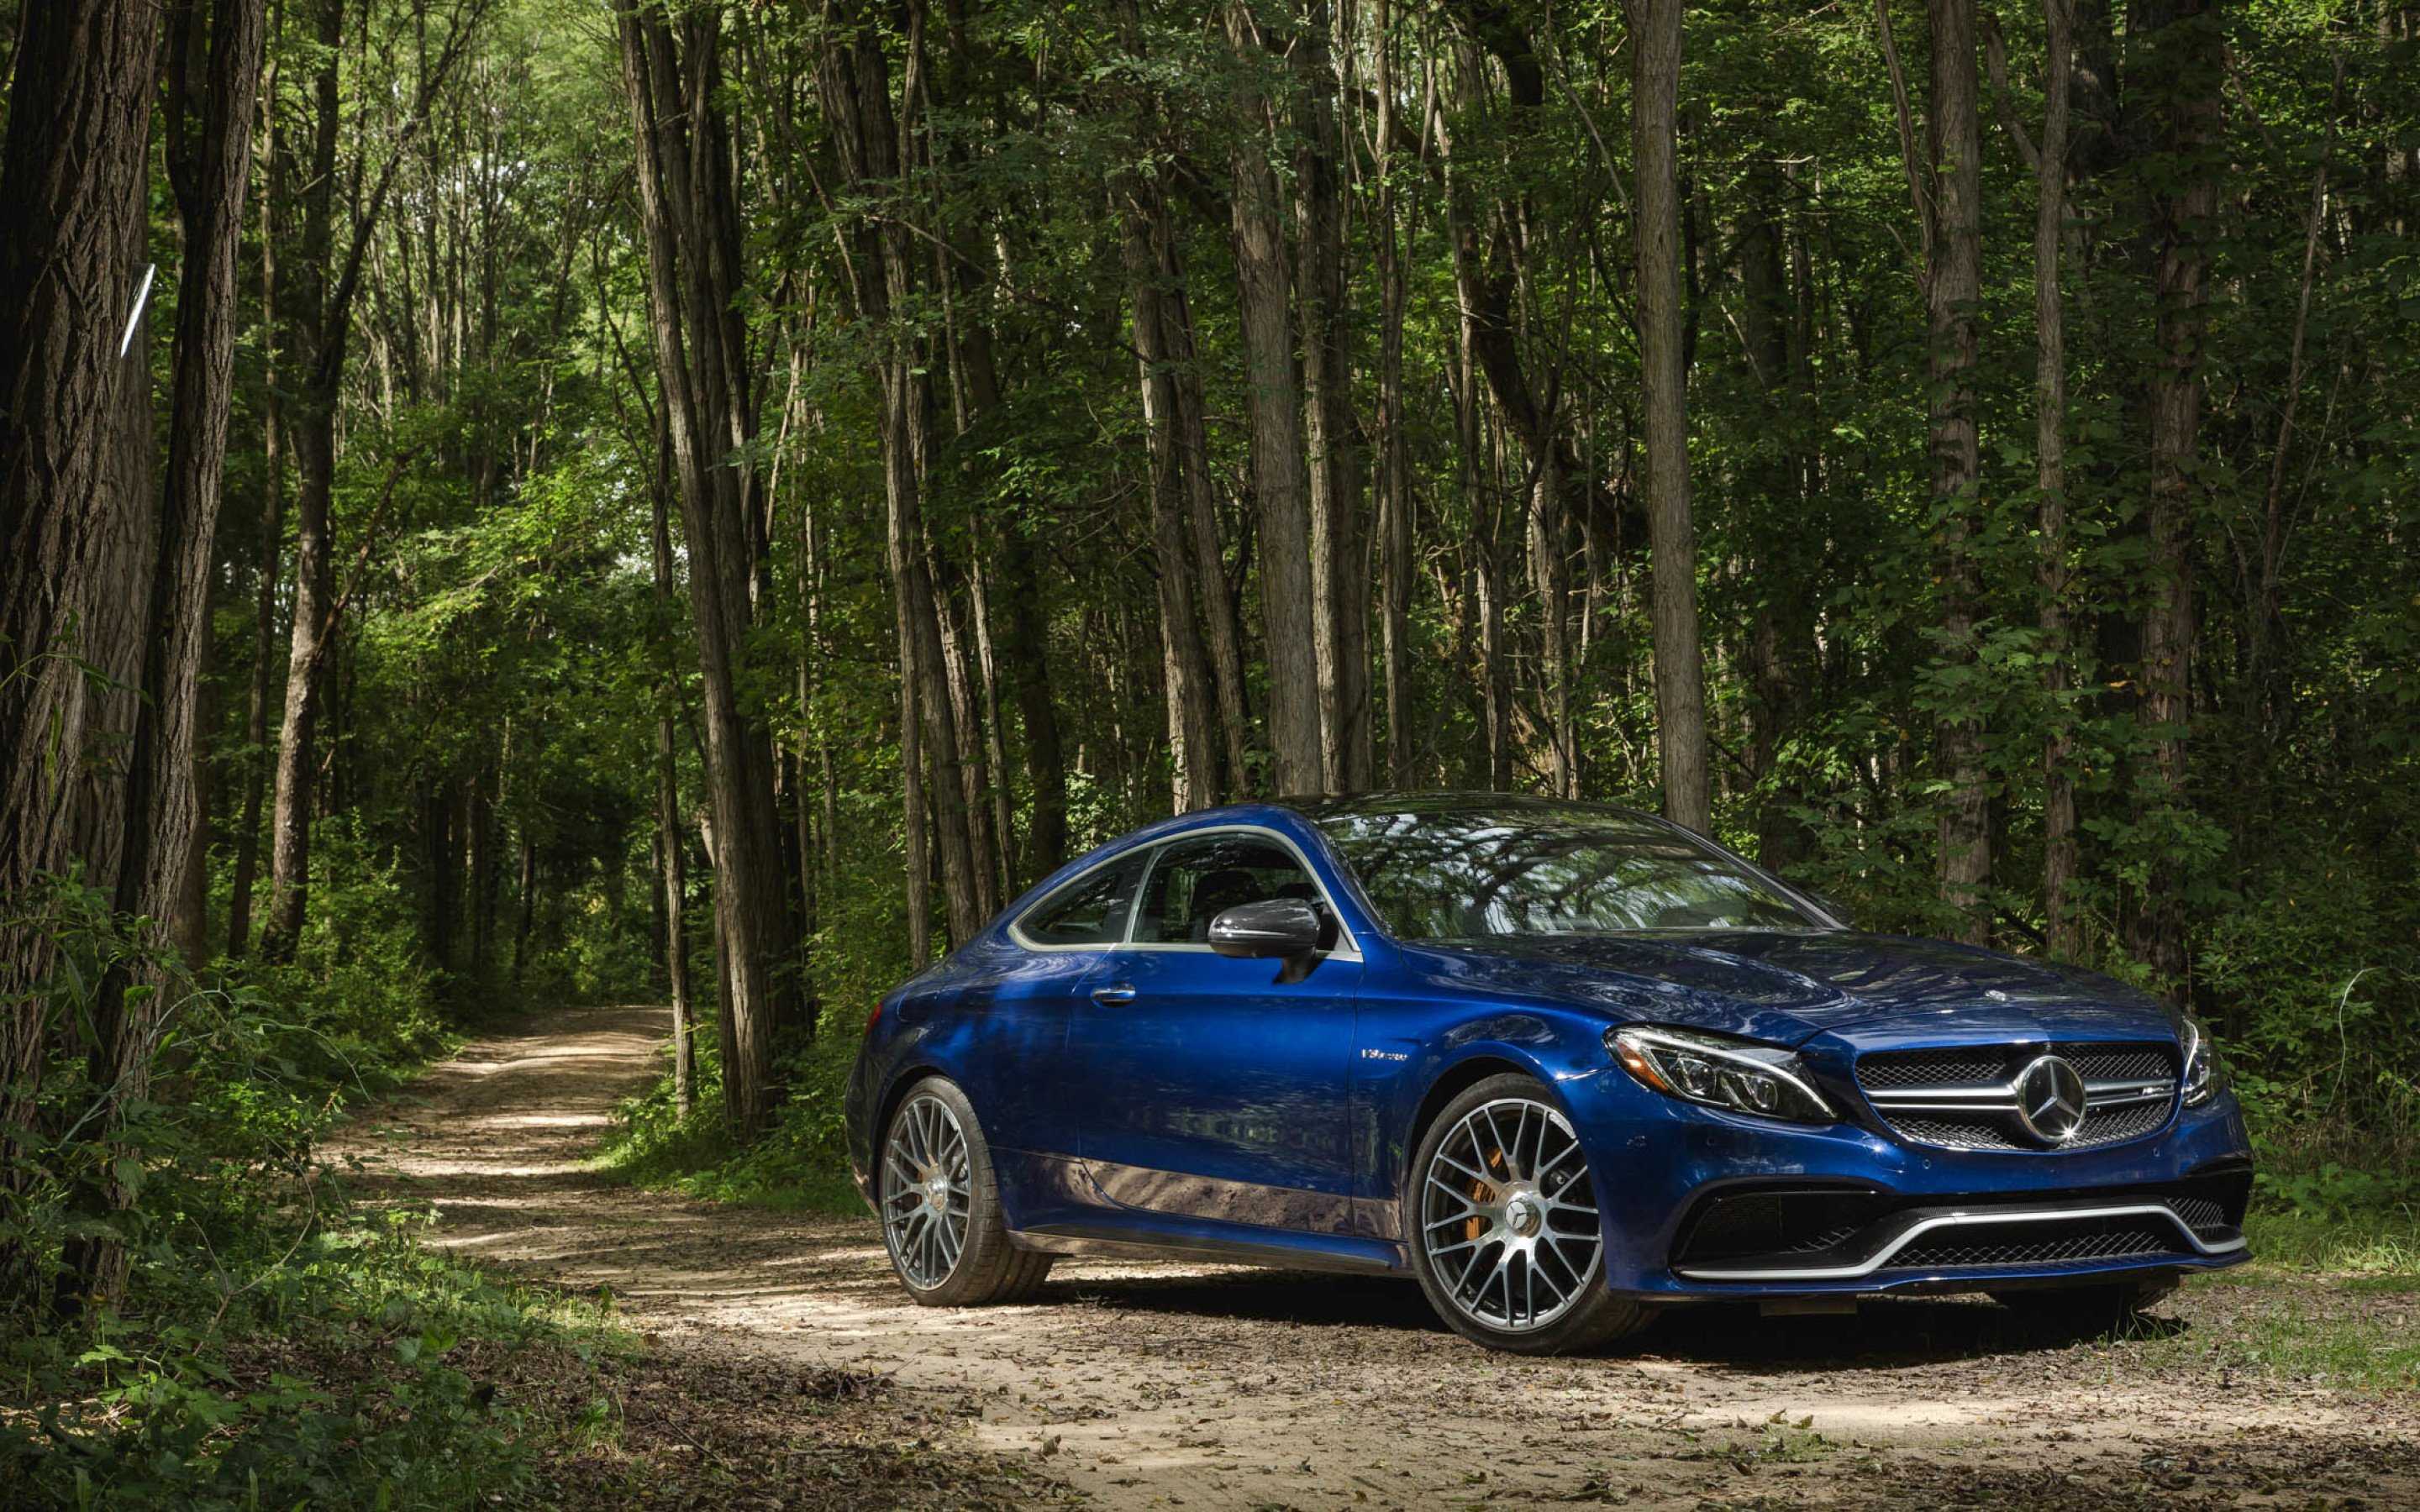 Mercedes AMG C63 S Coupe HD Wallpaper (2880x1800)